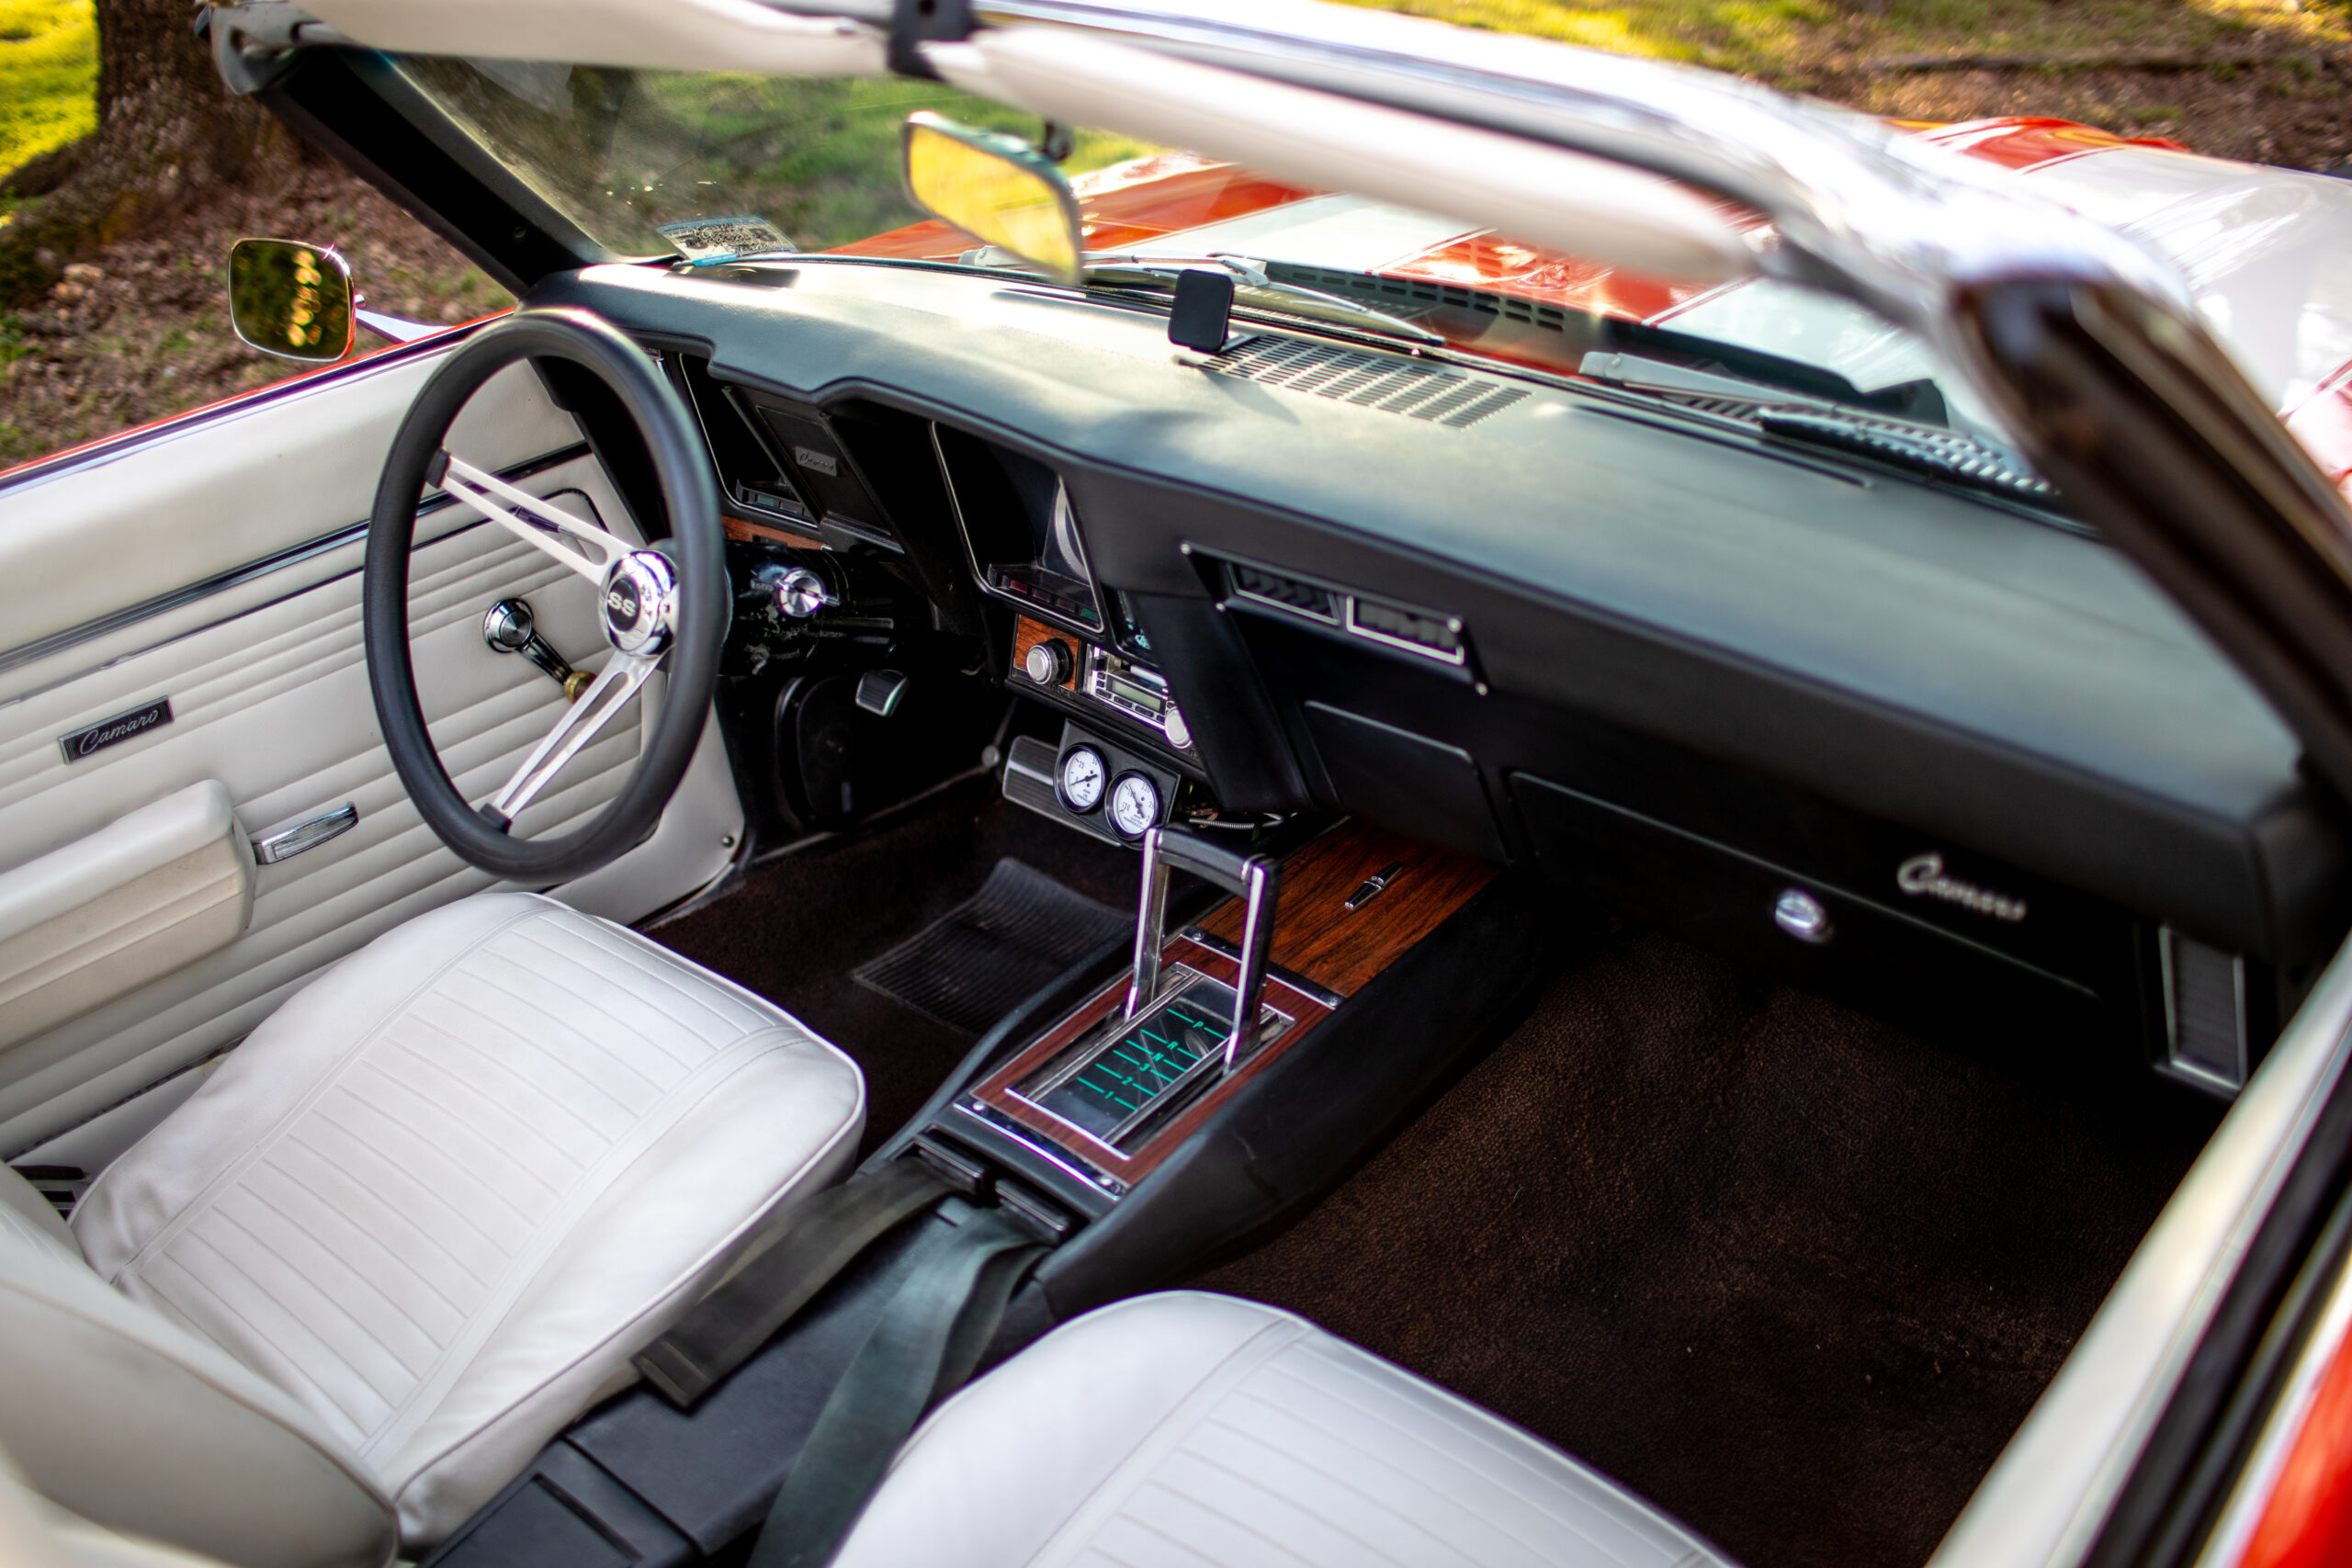 Interior view of a classic convertible car with white leather seats, a black dashboard, and wood accents. The view shows the steering wheel, gear shift, and control panel.